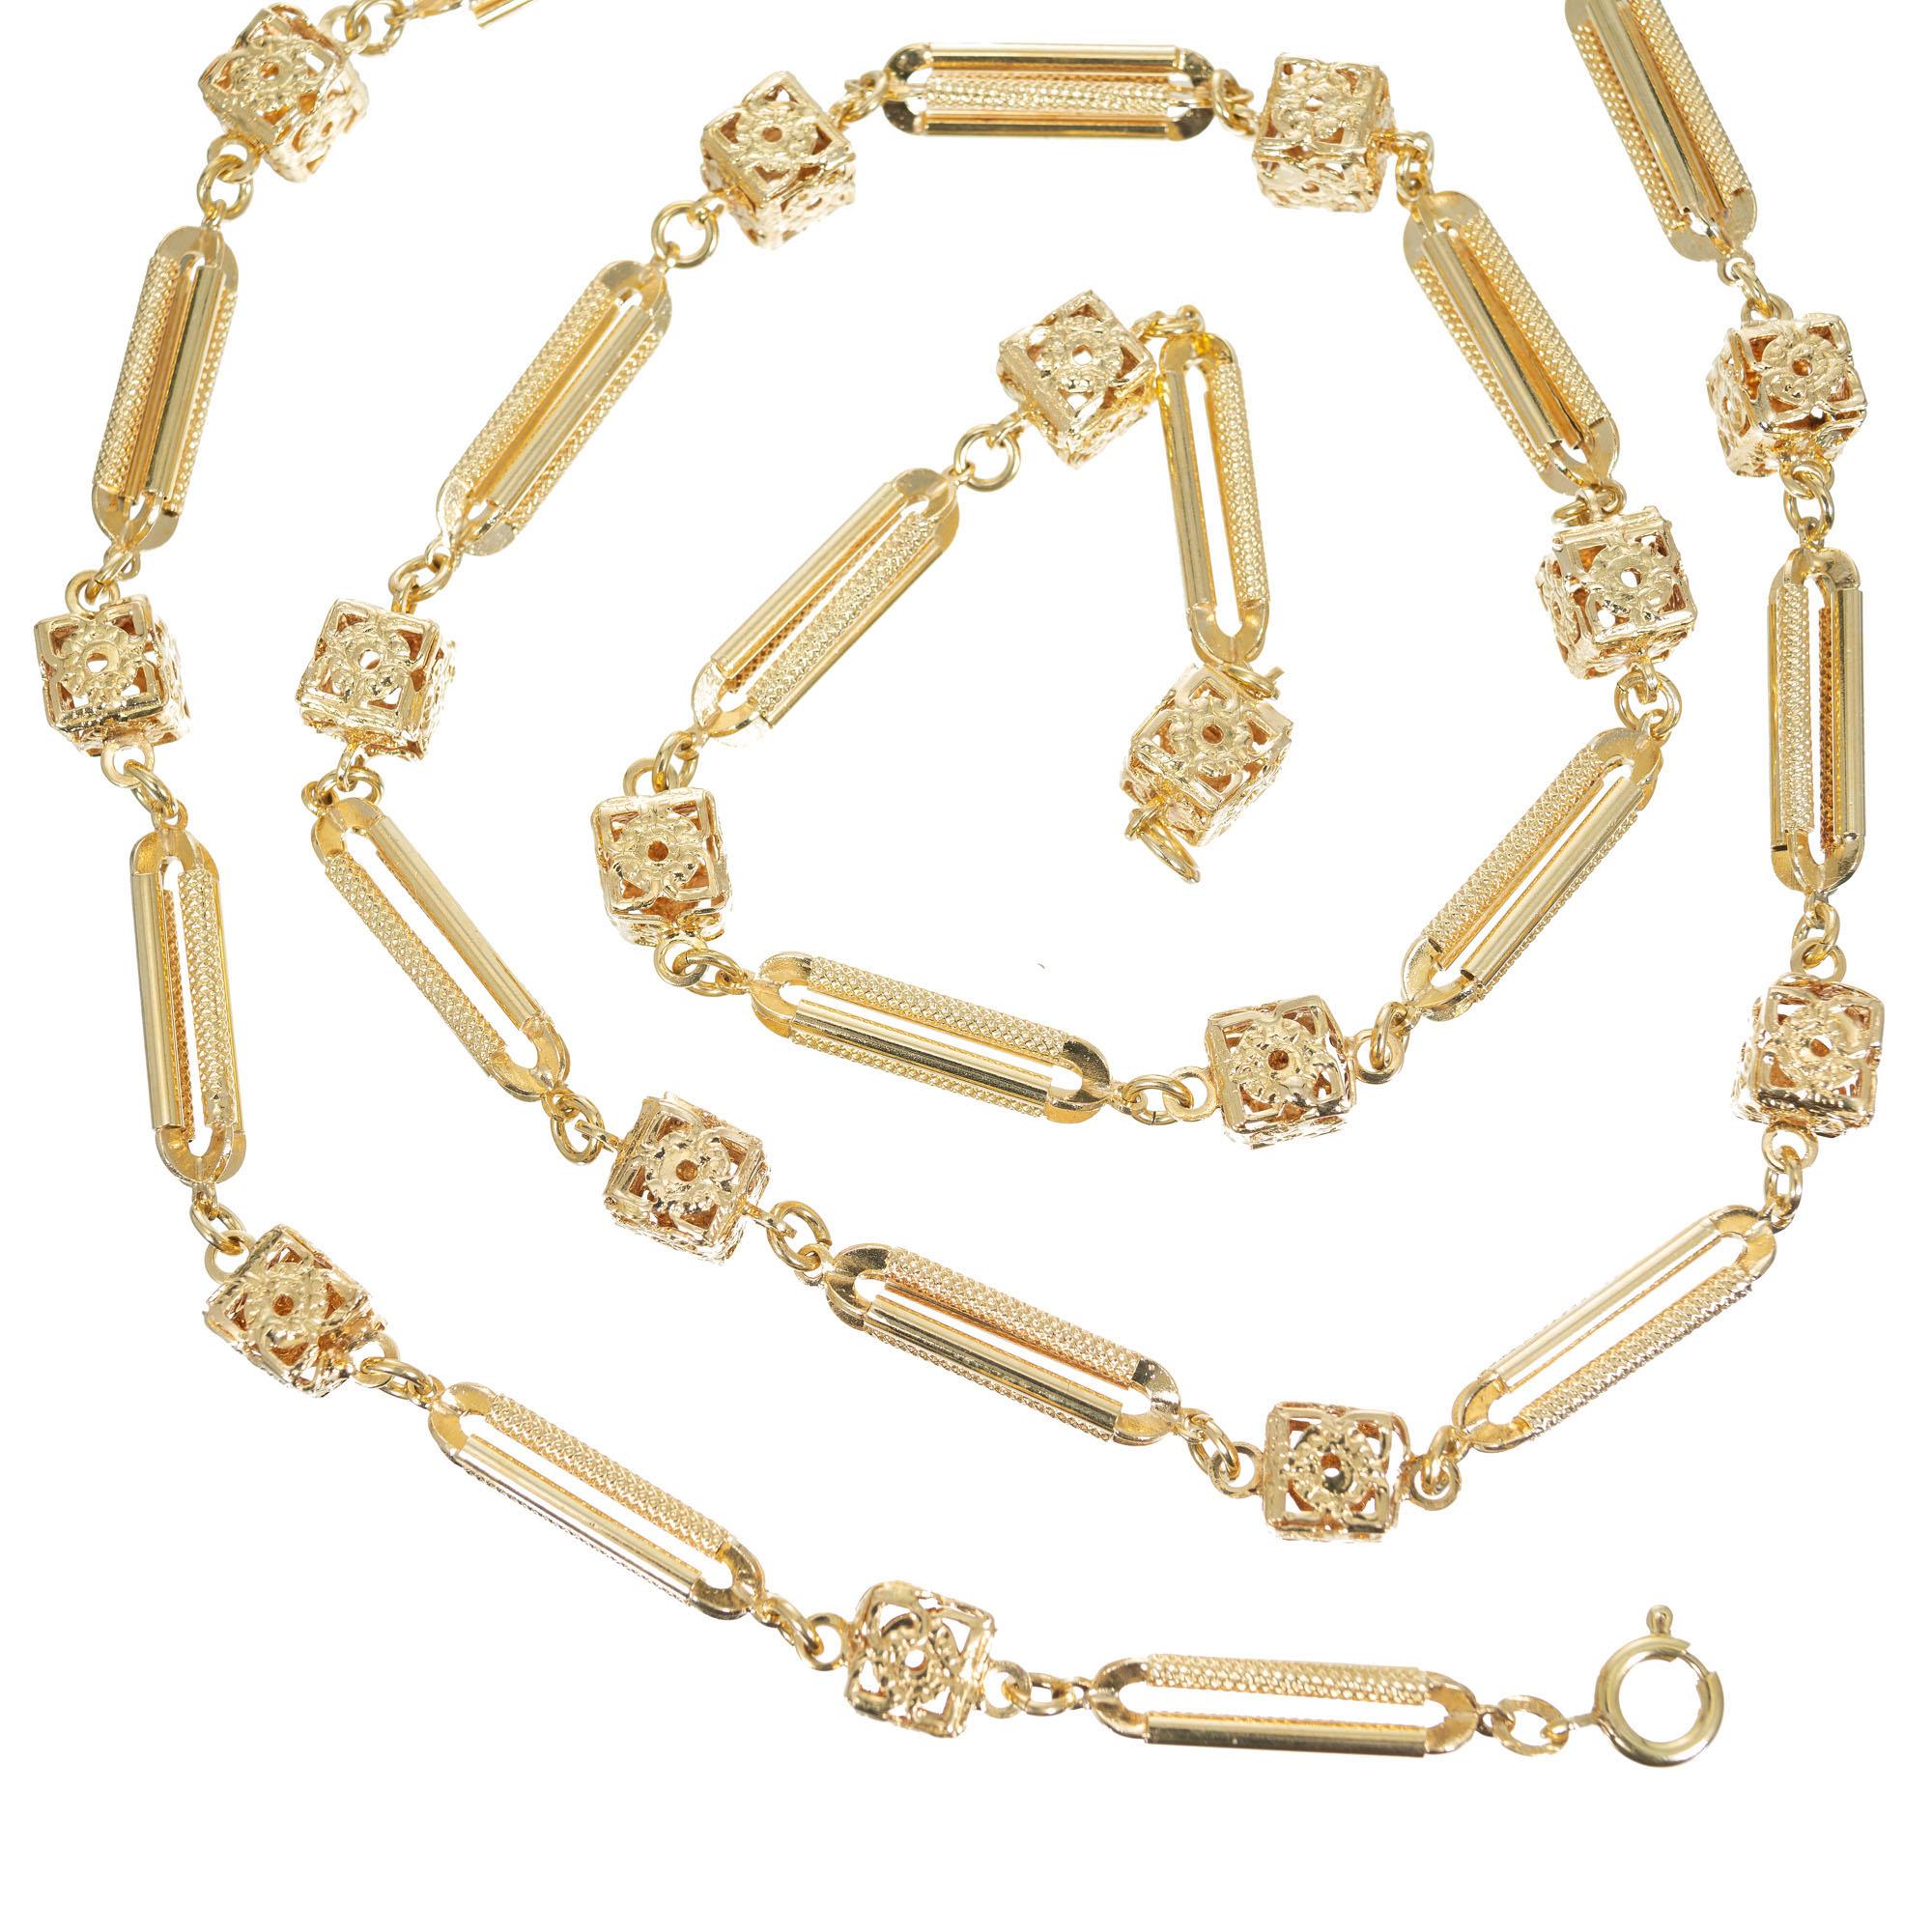 1940’s custom link 32 Inch box and tube Chain Necklace.

14k yellow gold 
Stamped: 14k
36.1 grams
Chain: 32 Inches
Width: 8mm
Thickness/depth: 5.7mm
Bars: 22 x 5mm
Cube: 8mm x 8mm
